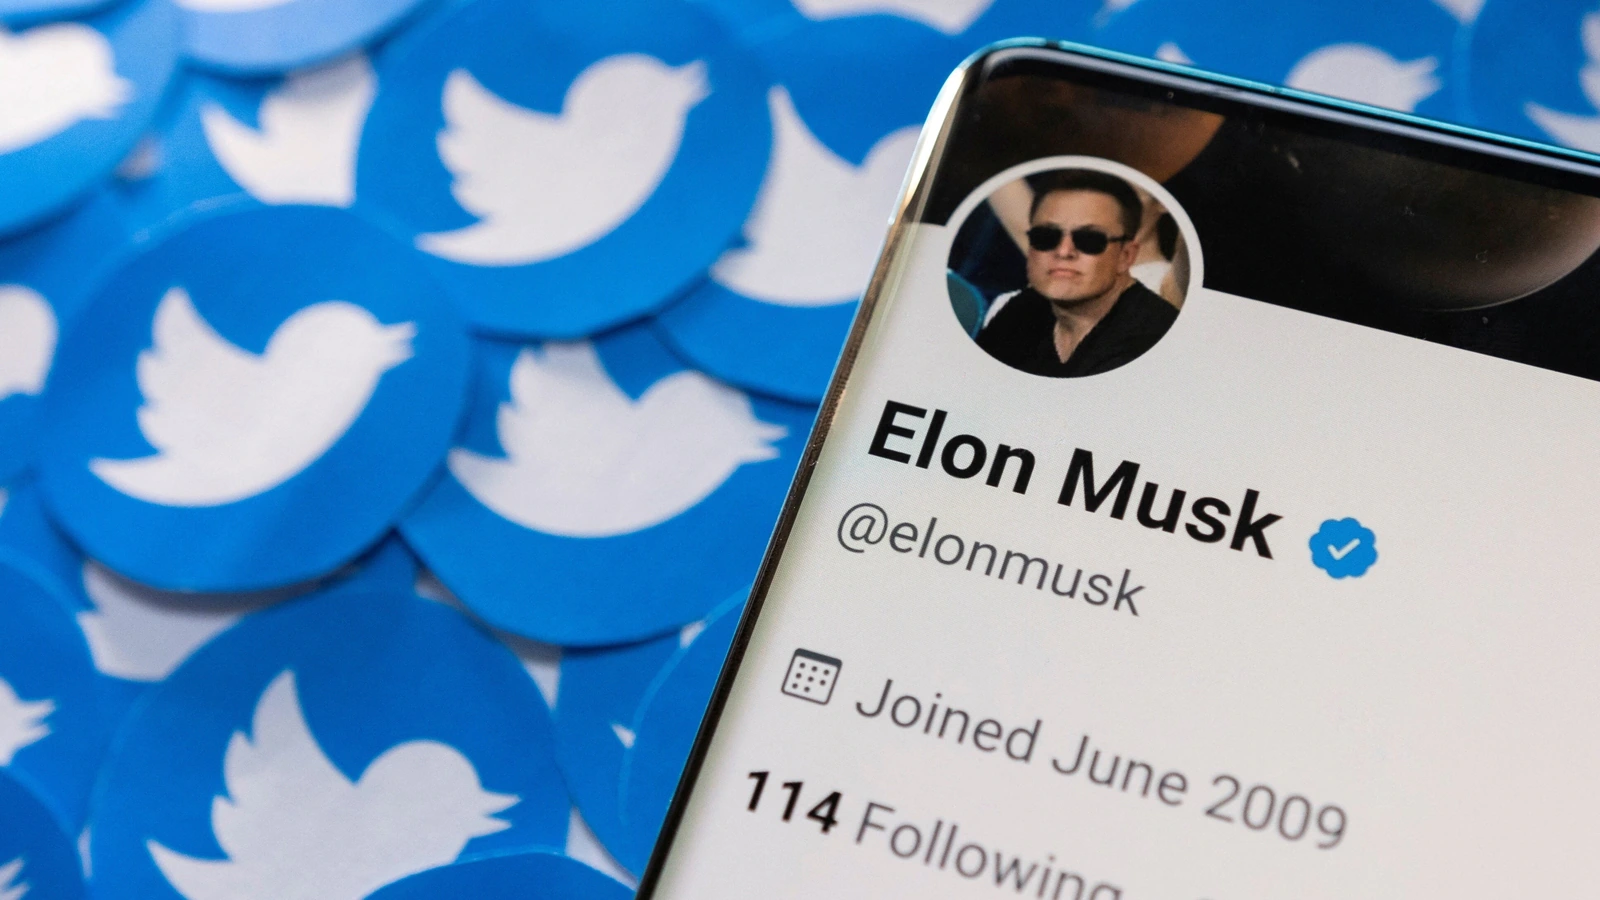 Elon Musk on ‘left, right and center’ amid debate over his Twitter takeover